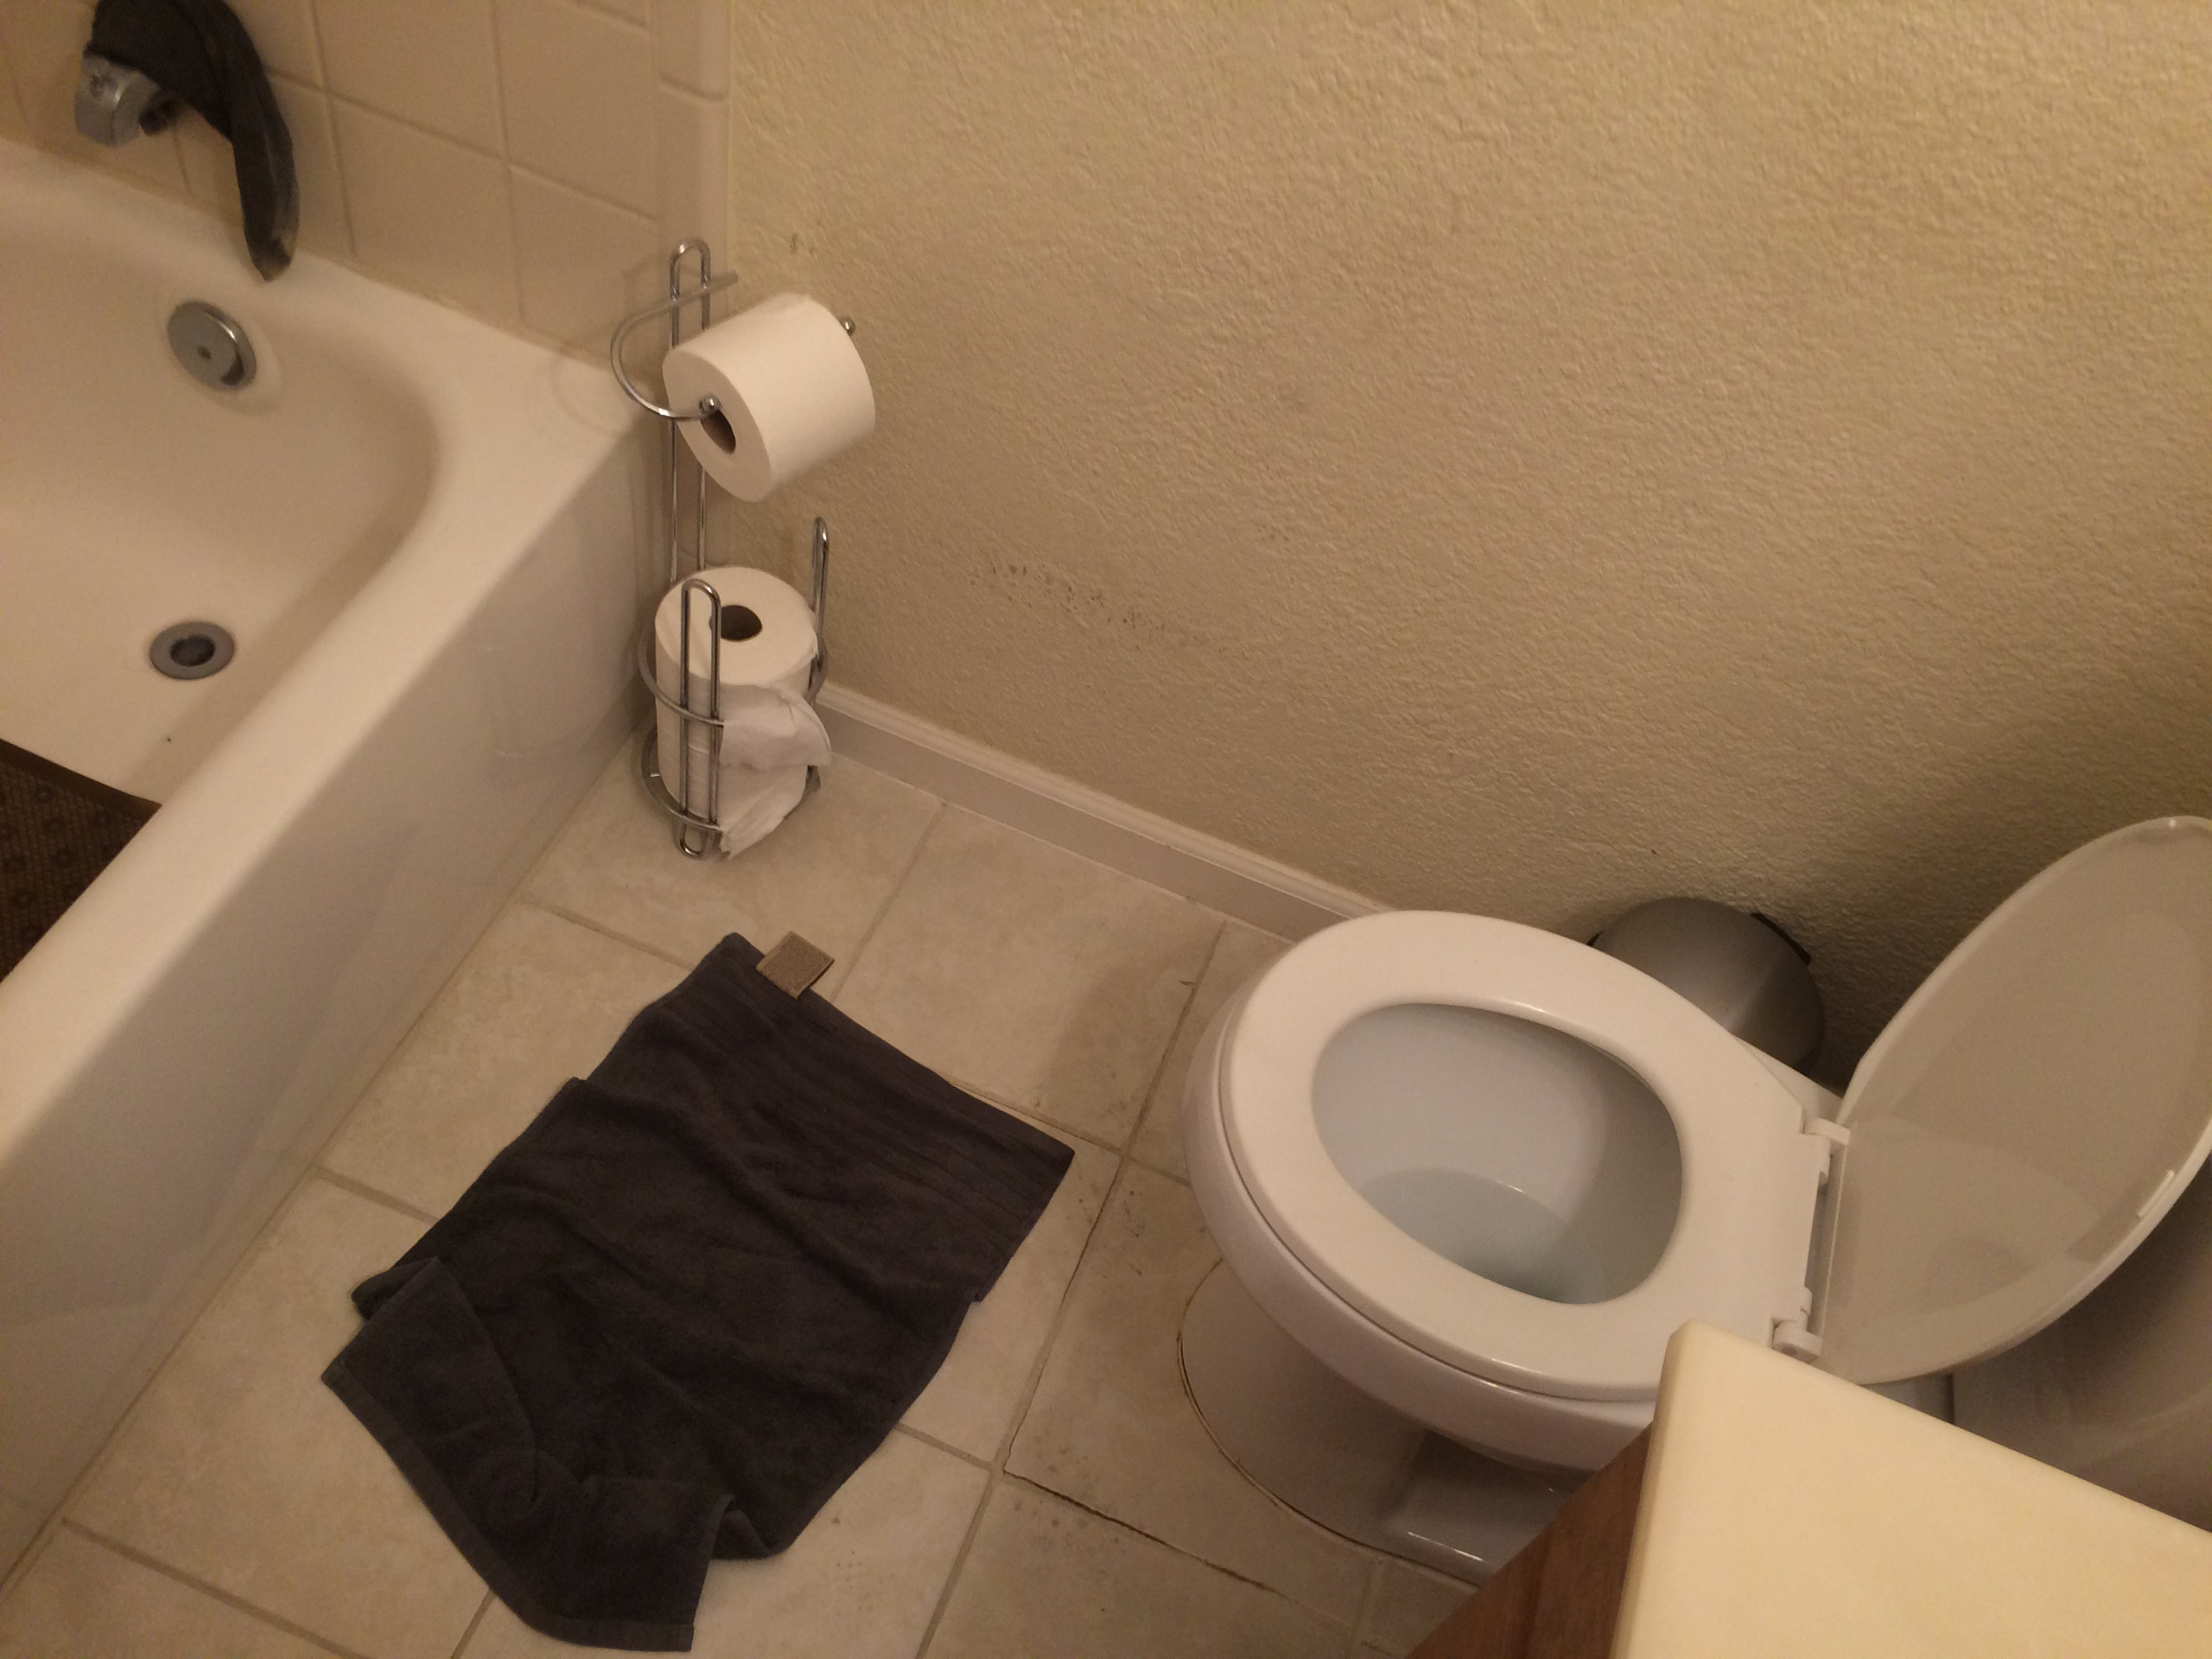 BEFORE PIC - Non-code compliant toilet & low height tub